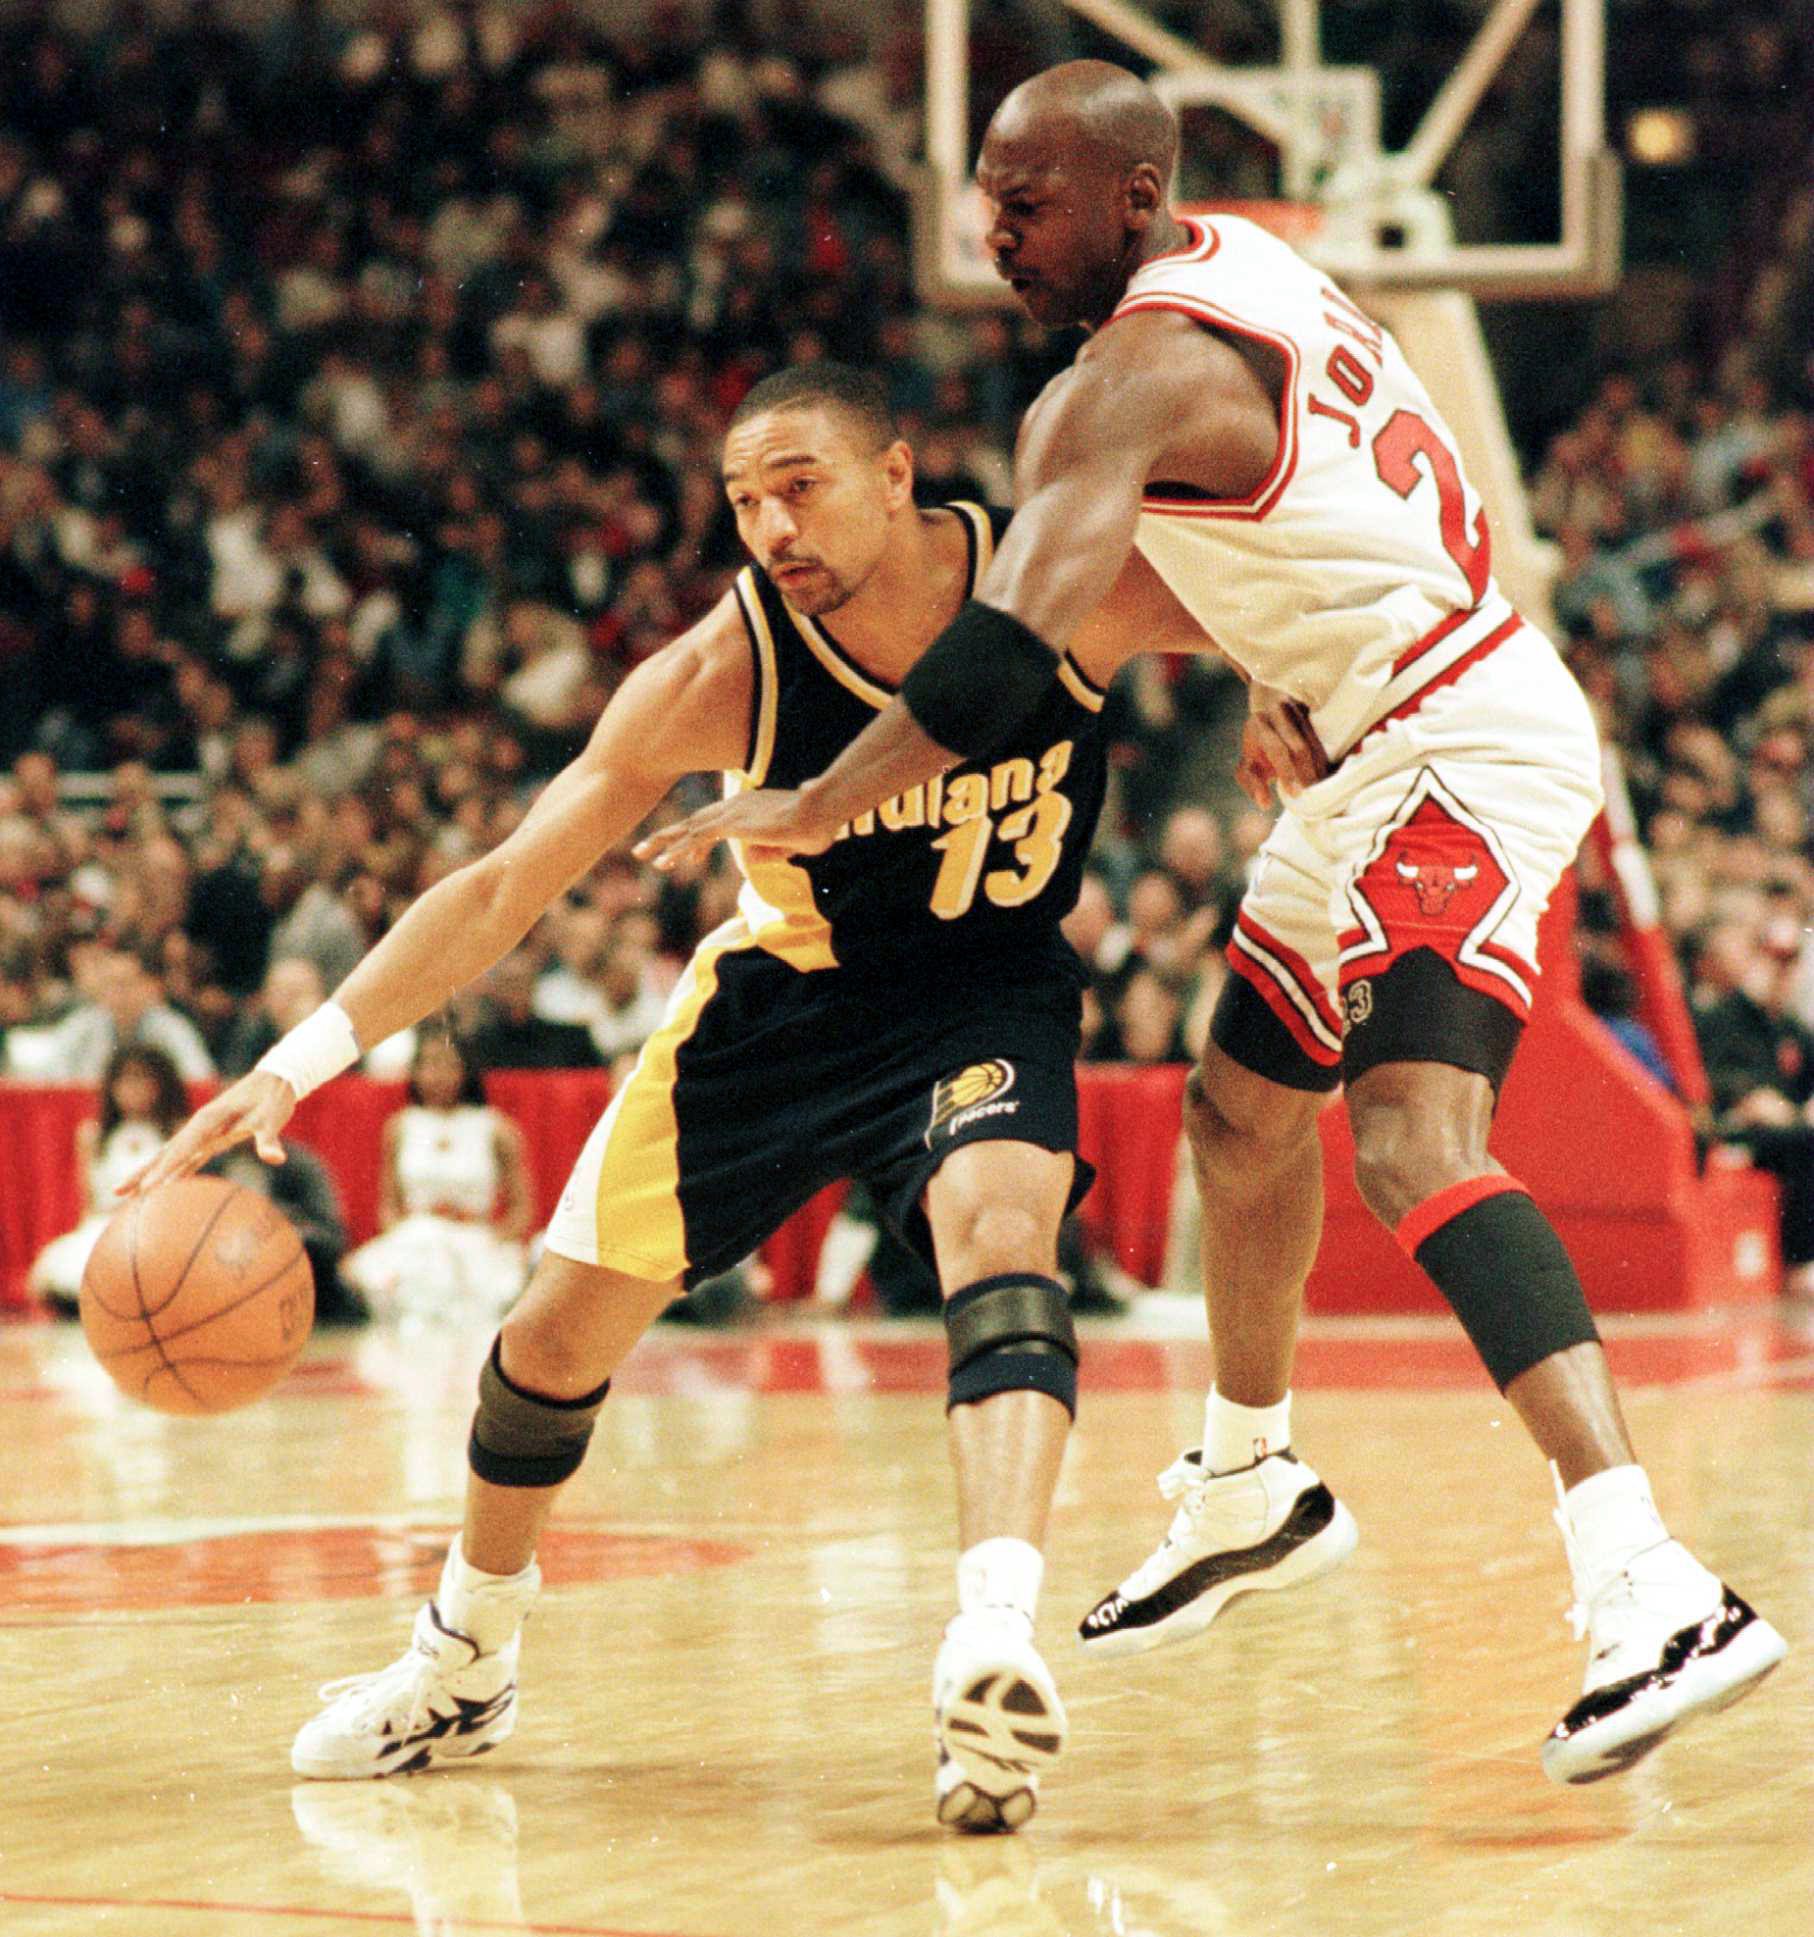 20 Apr 1996:  Point guard Mark Jackson of the Indiana Pacers fends off the defensive pressure applied by guard Michael Jordan of the Chicago bulls during the first quarter of the Bulls game against the Pacers at the United Center in Chicago, Illinois. Man